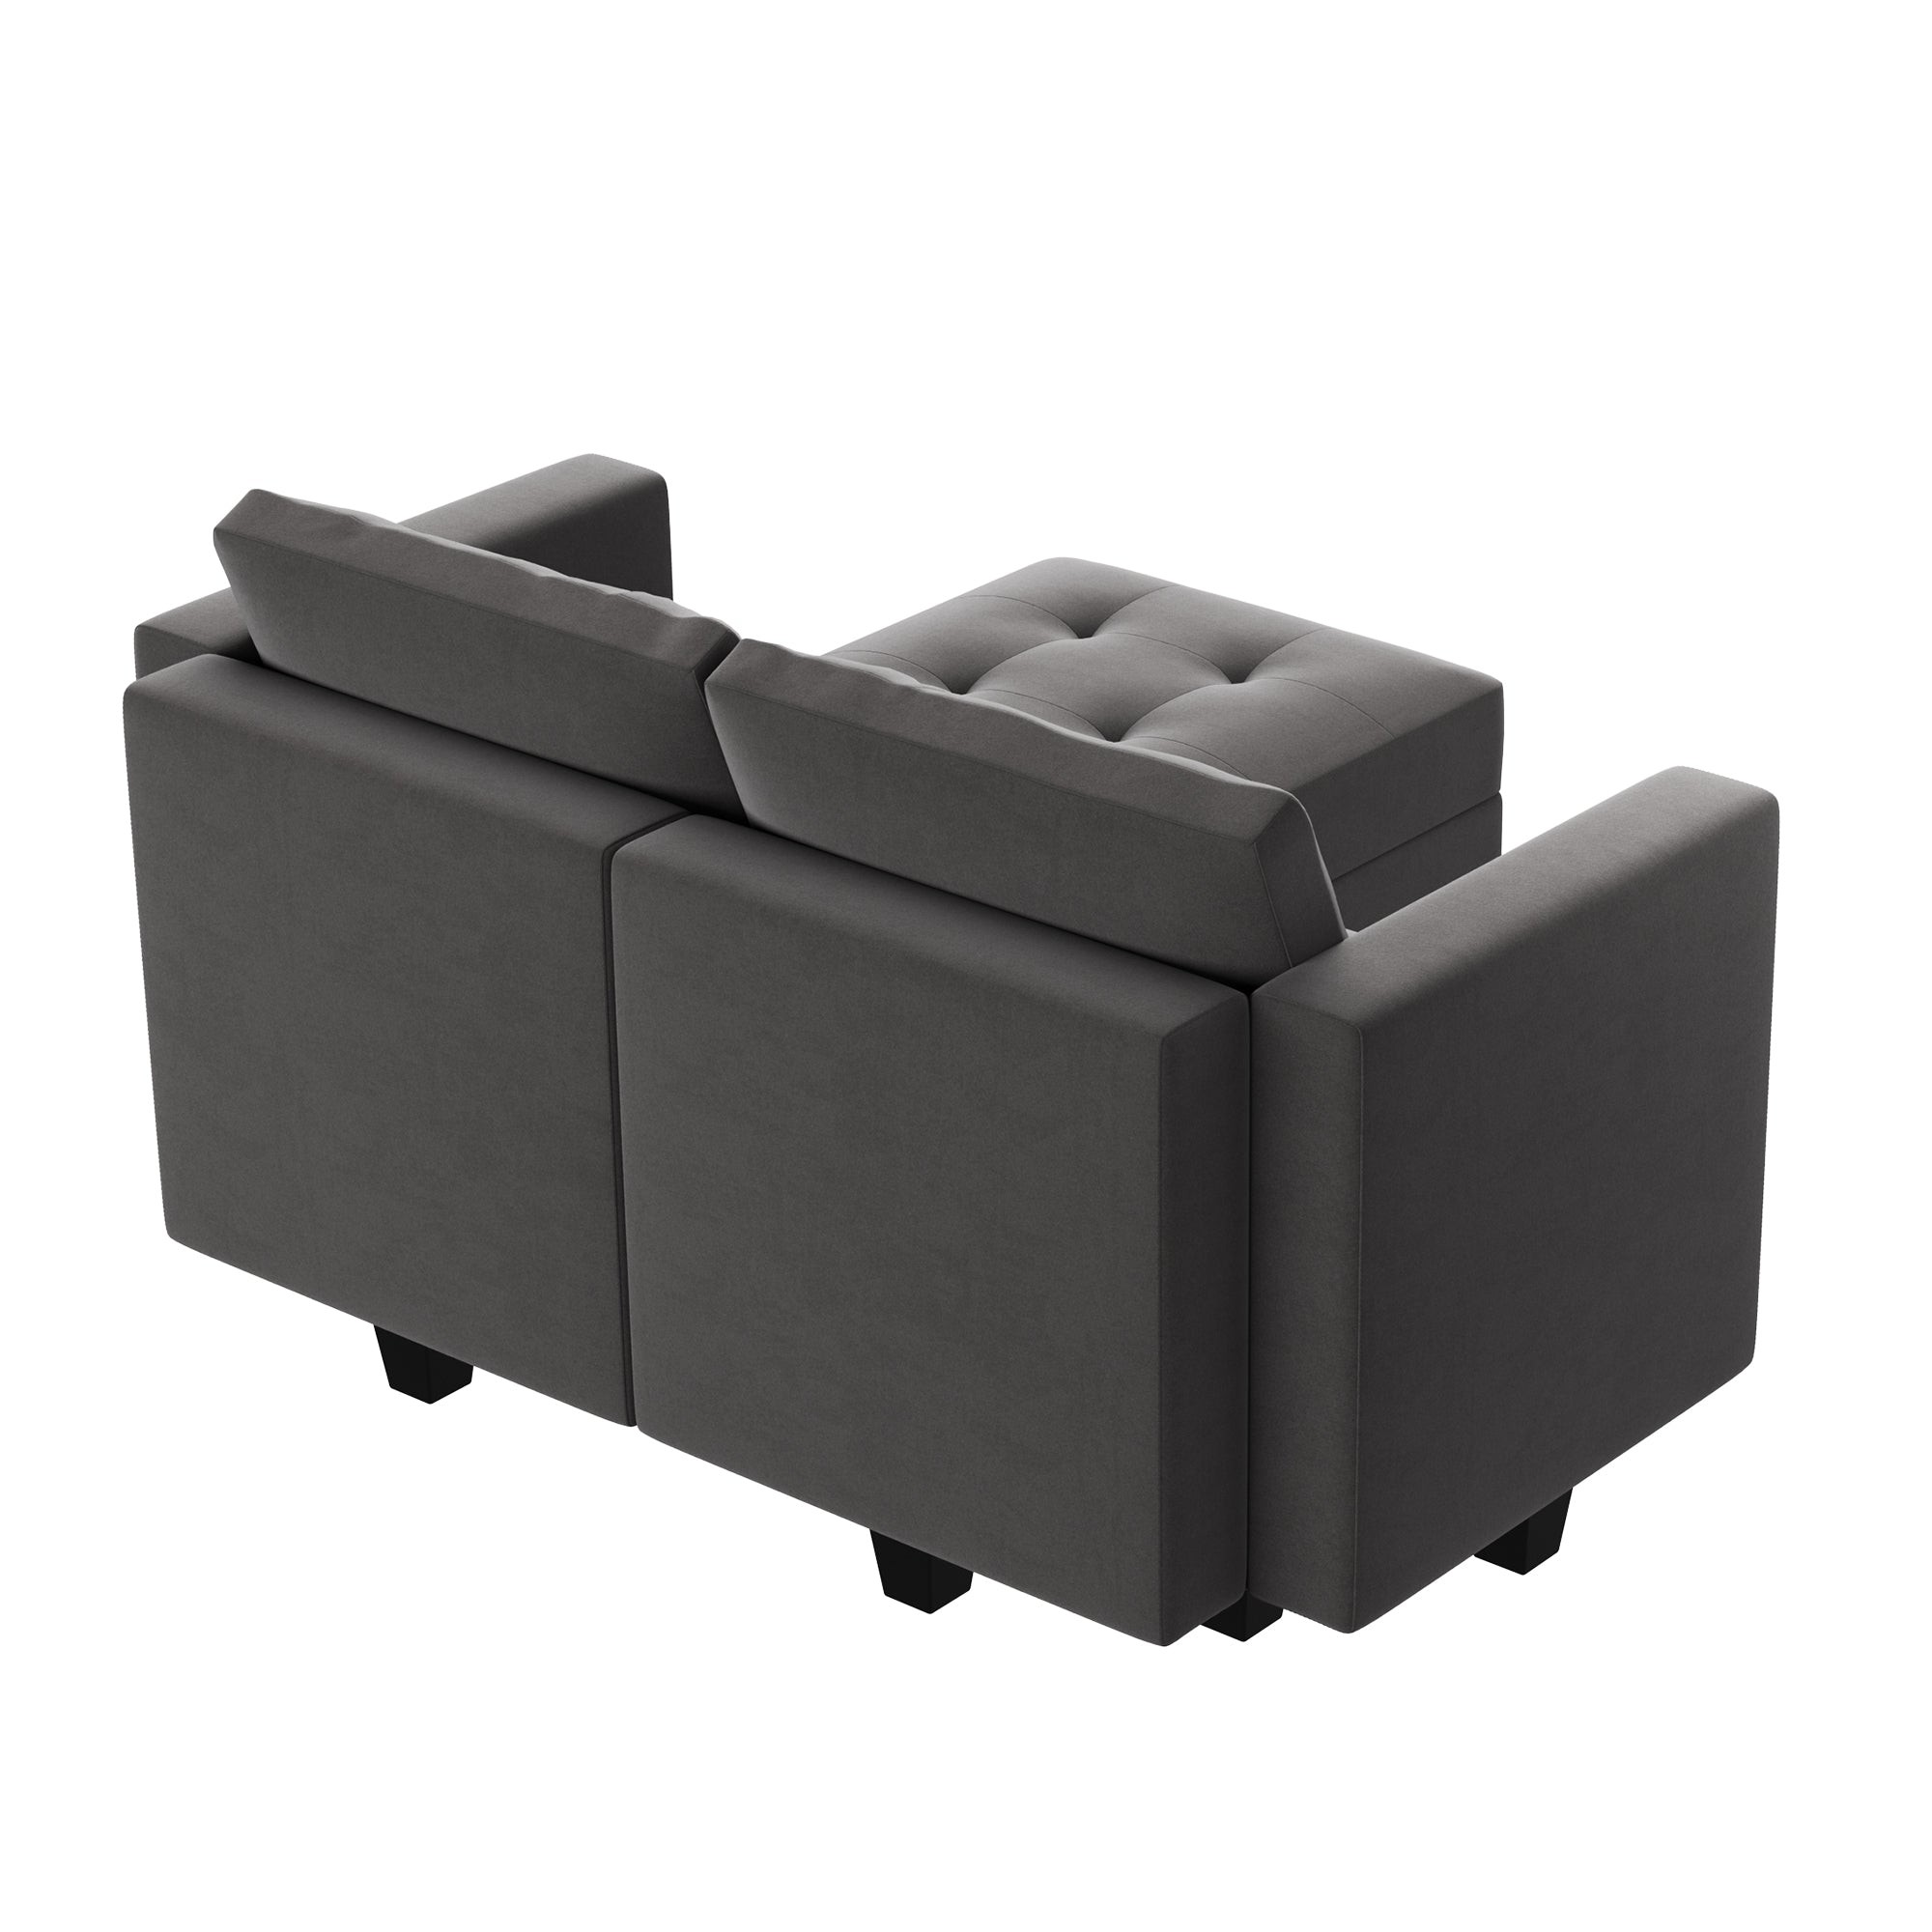 HONBAY 3-Piece Velvet Modular Sectional With Storage Seat